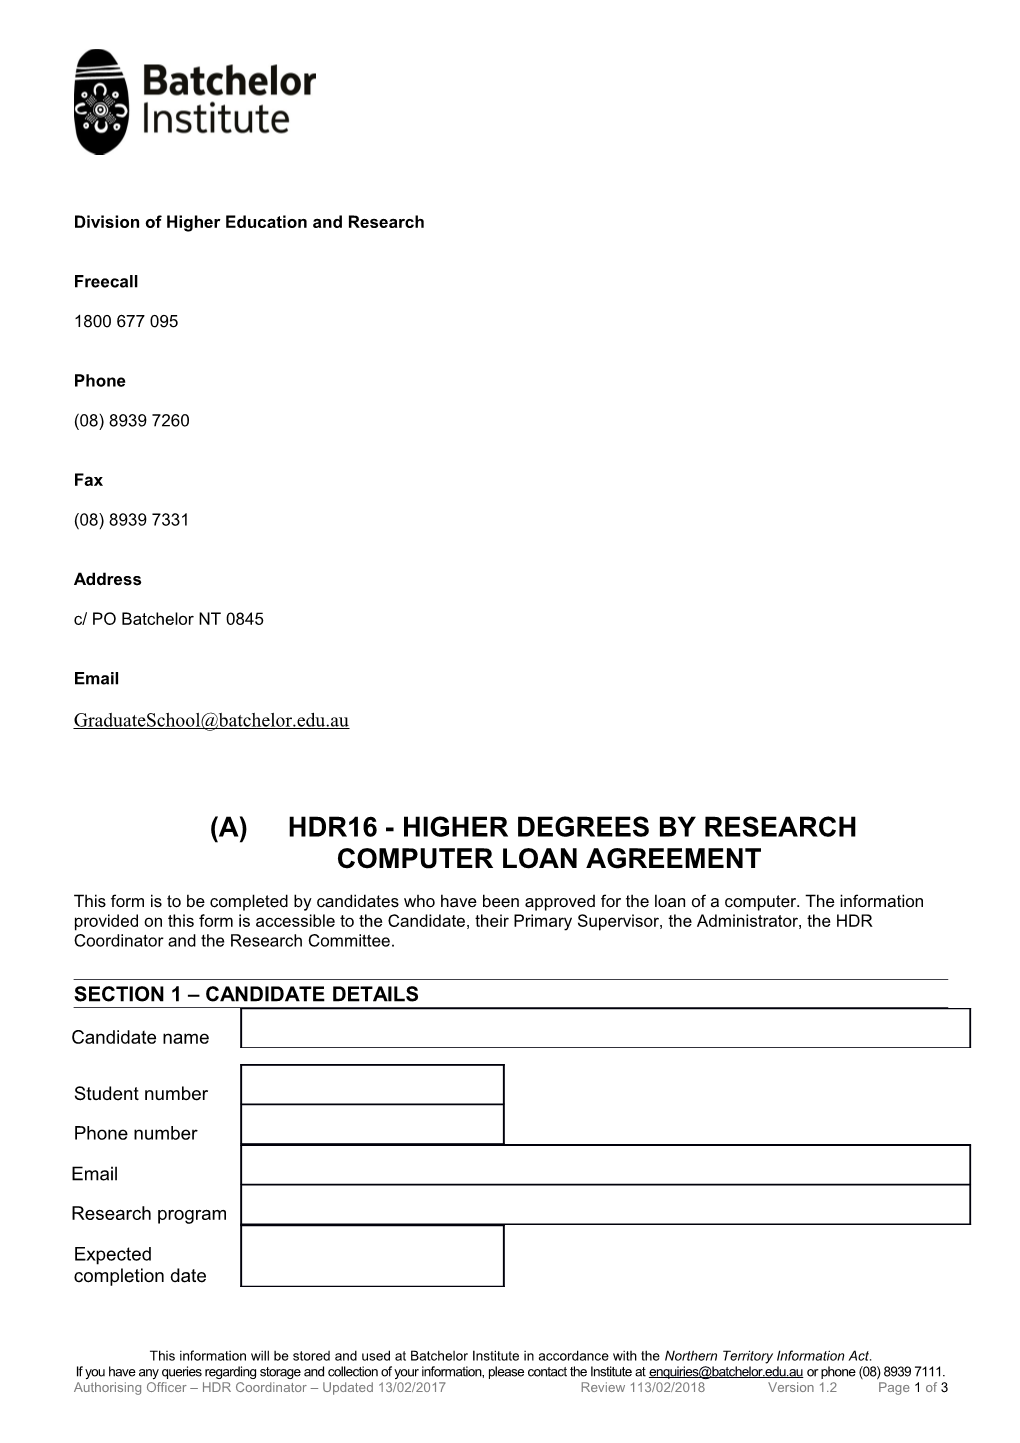 Hdr16 - Higher Degrees by Researchcomputer Loan Agreement